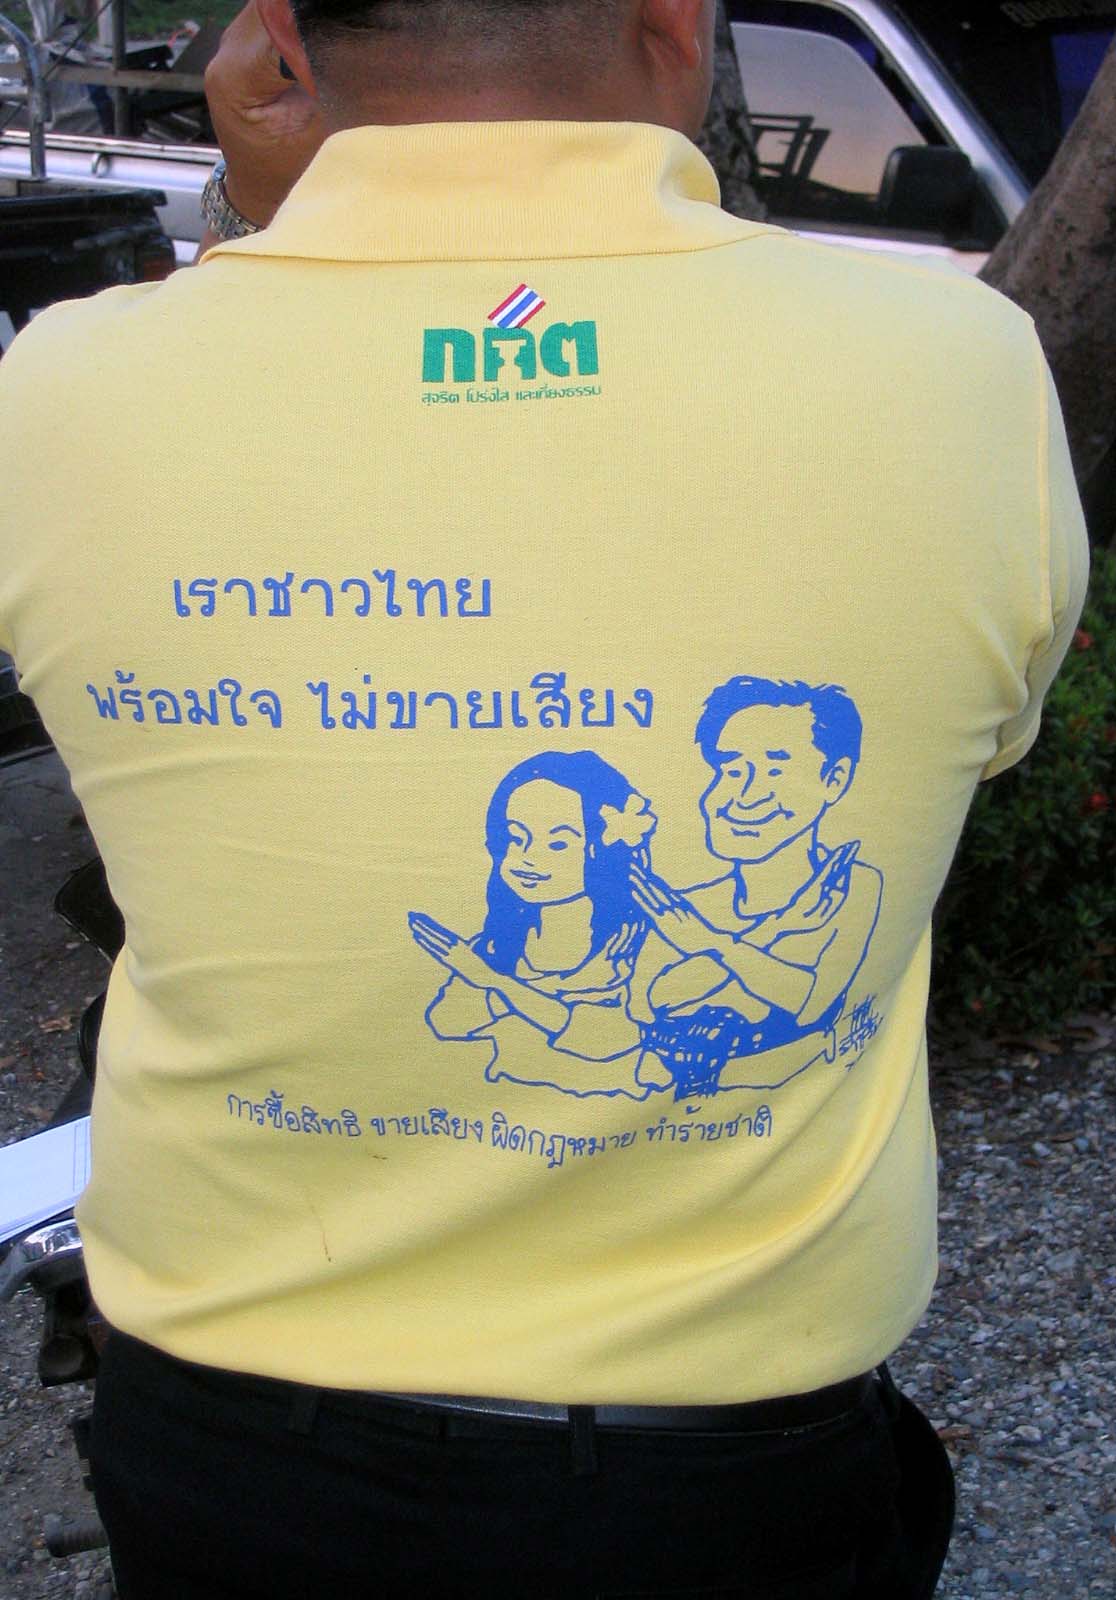 Michael H. Nelson, Chachongsao Election Campaign, Thailand 2007